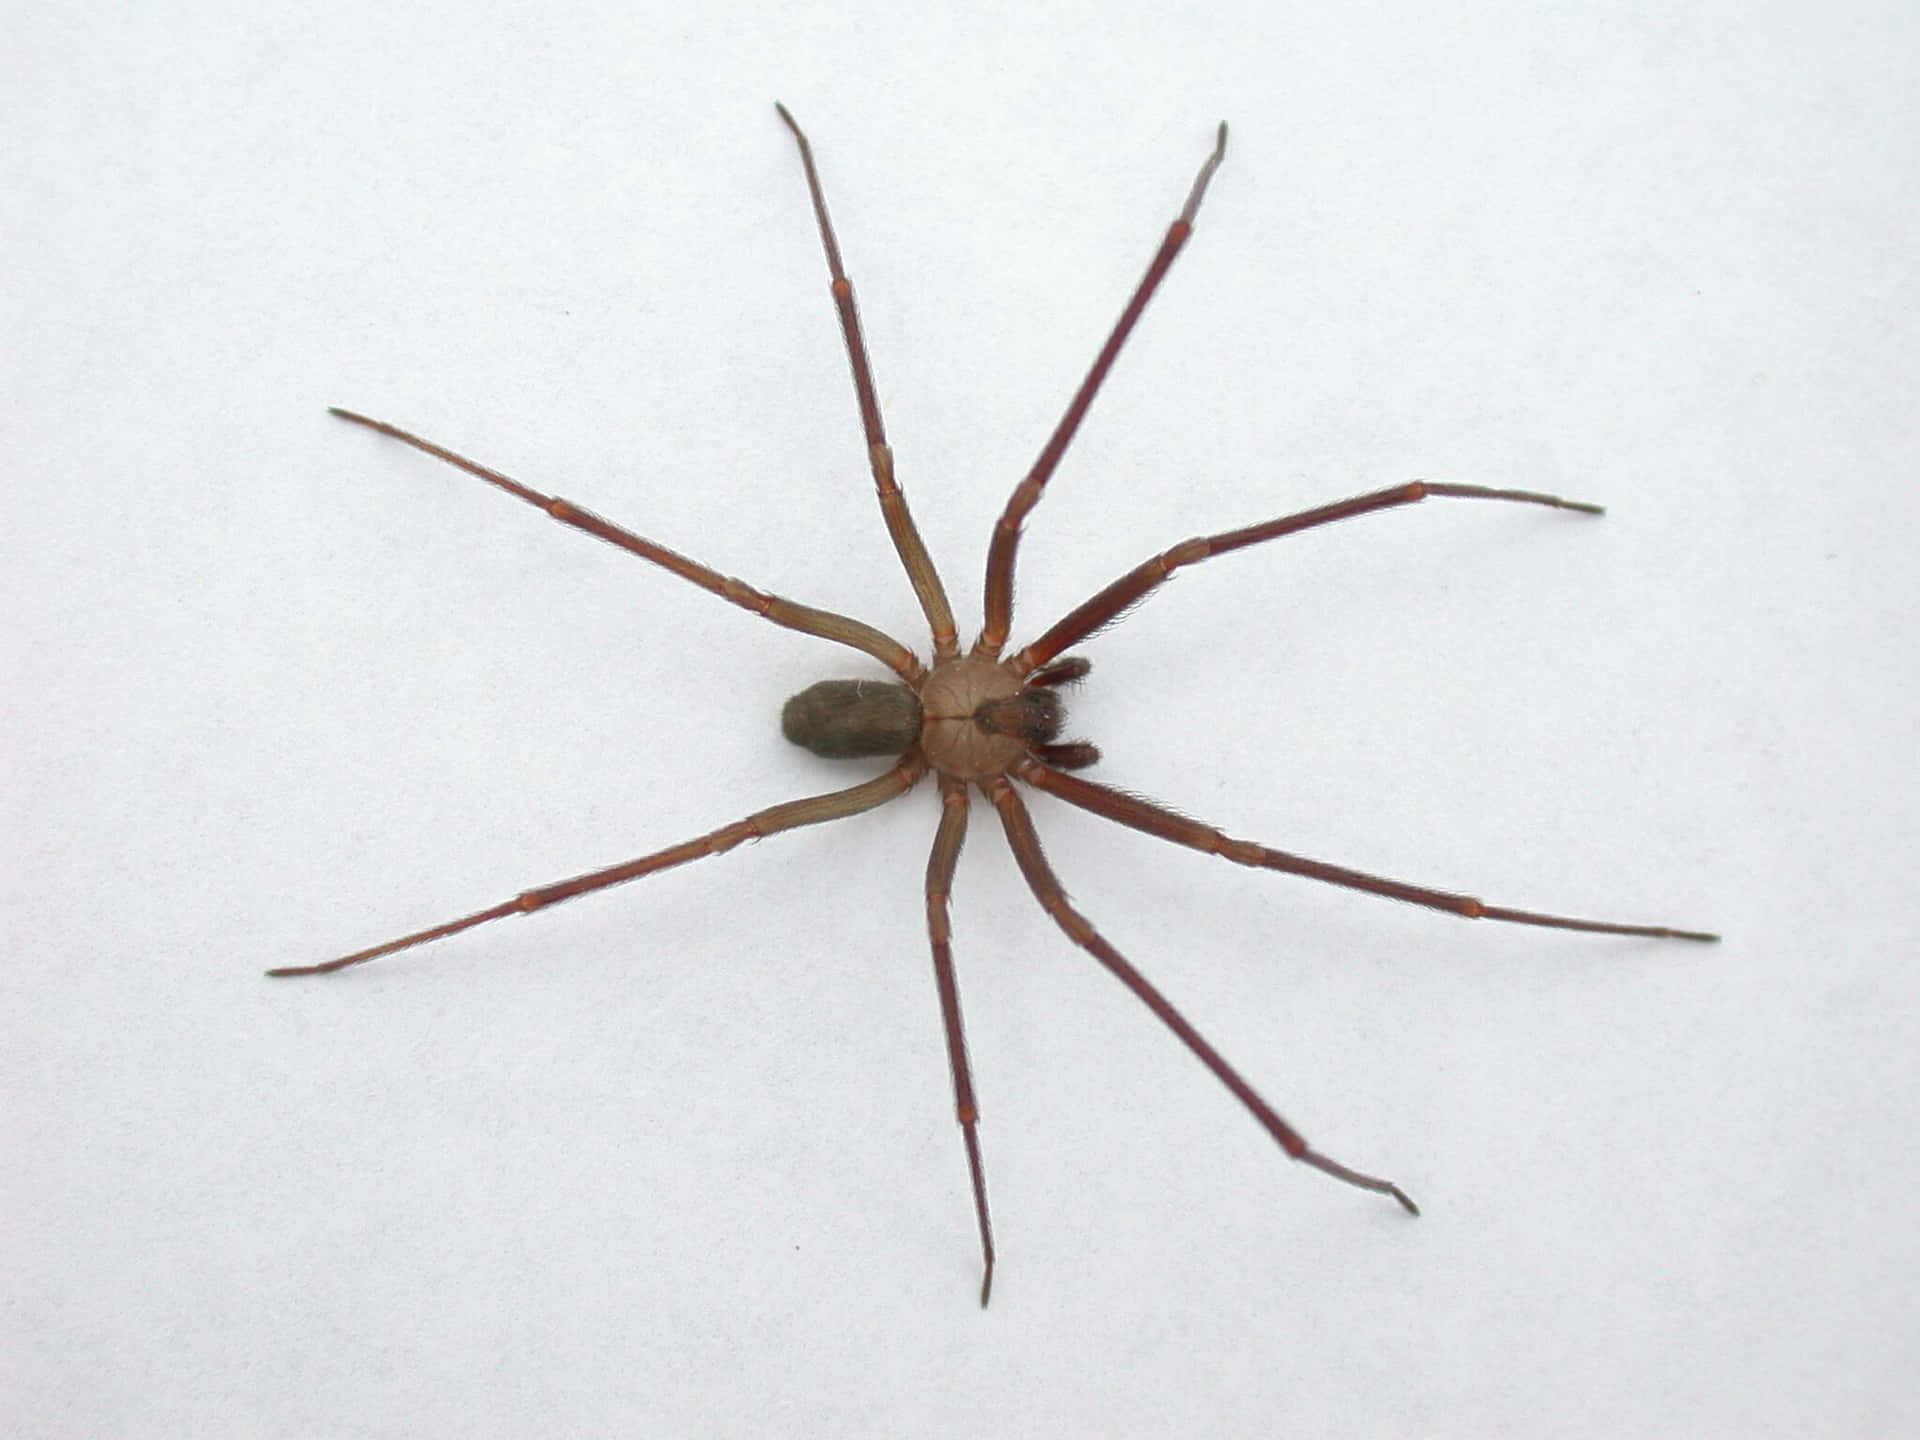 Up Close and Personal with a Brown Recluse Spider Wallpaper